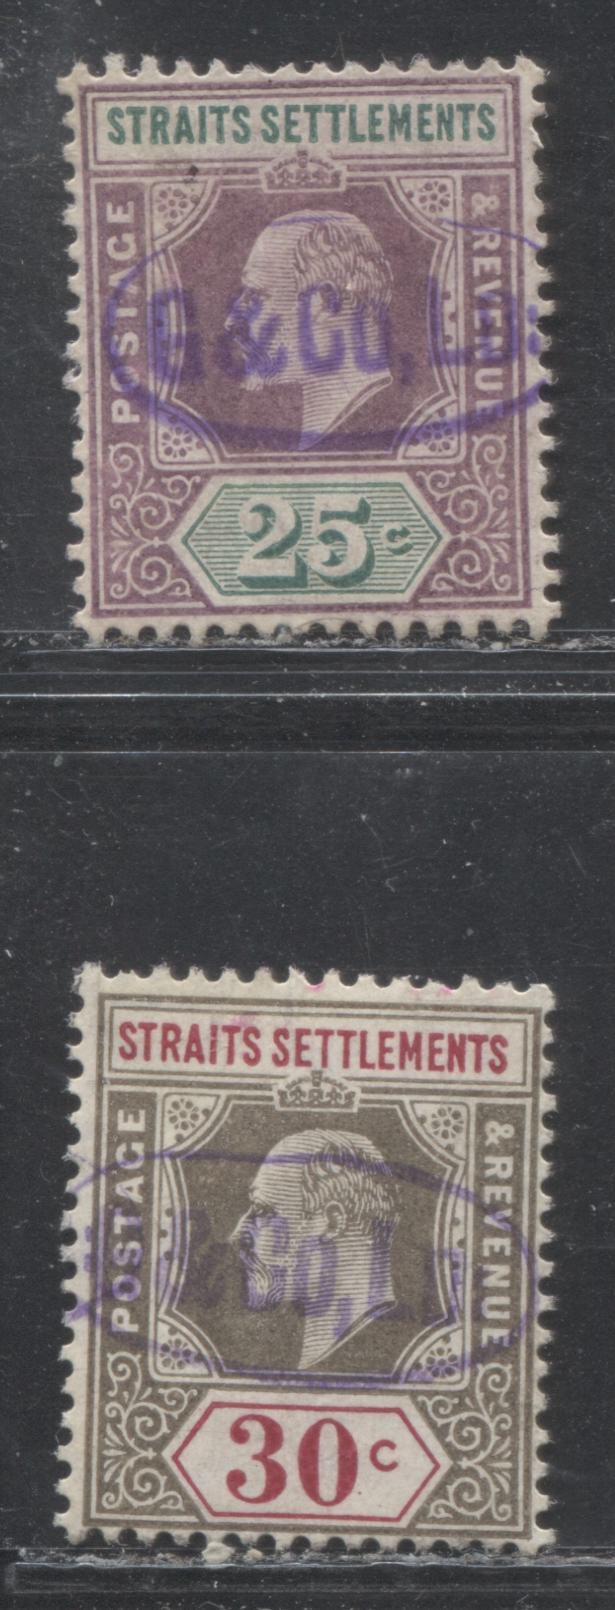 Lot 258 Malaya - Straits Settlements SG#133a, 134a 25c & 30c Dull Purple & Green and Grey Black & Carmine King Edward VII, 1904-1910 Multiple Crown CA Imperium Keyplate Issue, 2 Fine and VF Used Singles, Multiple Crown CA Watermark